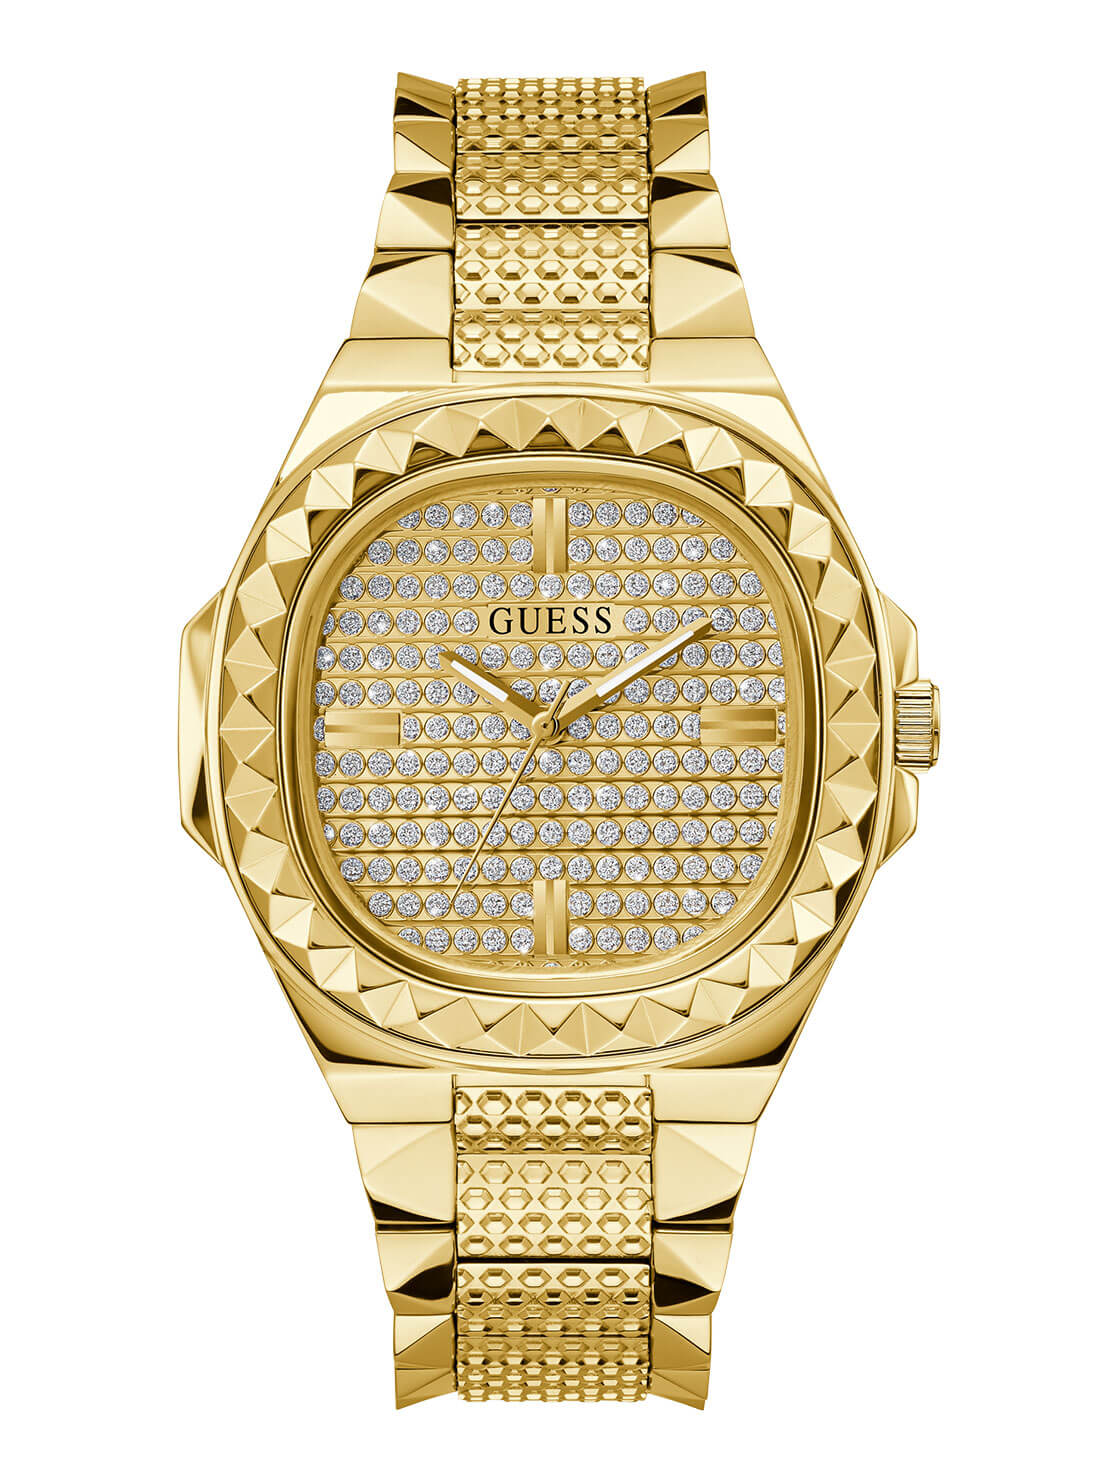 Gold Rebel Crystal Watch | GUESS Men's watches | front view